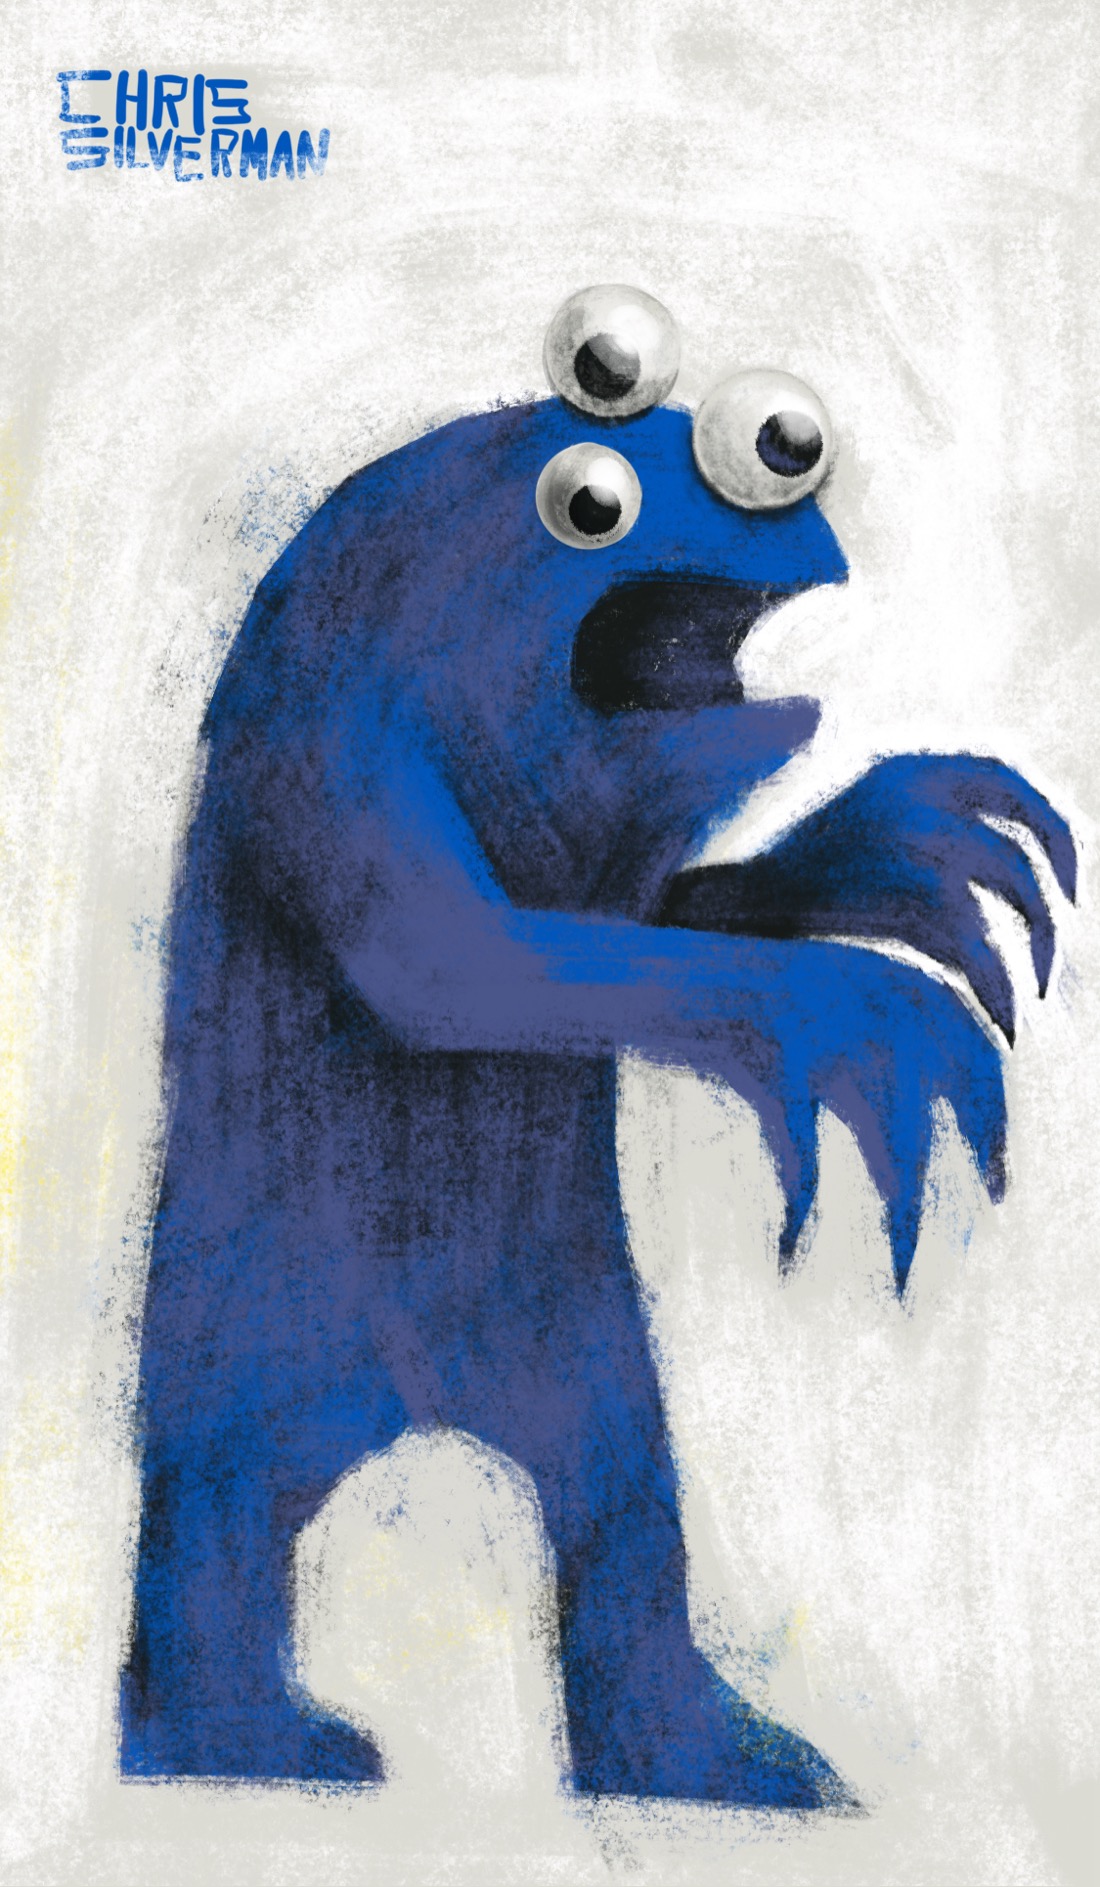 A hulking blue monster, standing on two legs, clawed arms outstretched in front of it. It appears to be roaring. It has a round, froglike head and vaguely resembles a more malevolent-looking version of Cookie Monster. In lieu of eyes, three googly eyes are pasted to the top of its head, as though it's a two-dimensional drawing with additional elements stuck to it. It is on a light beige background.